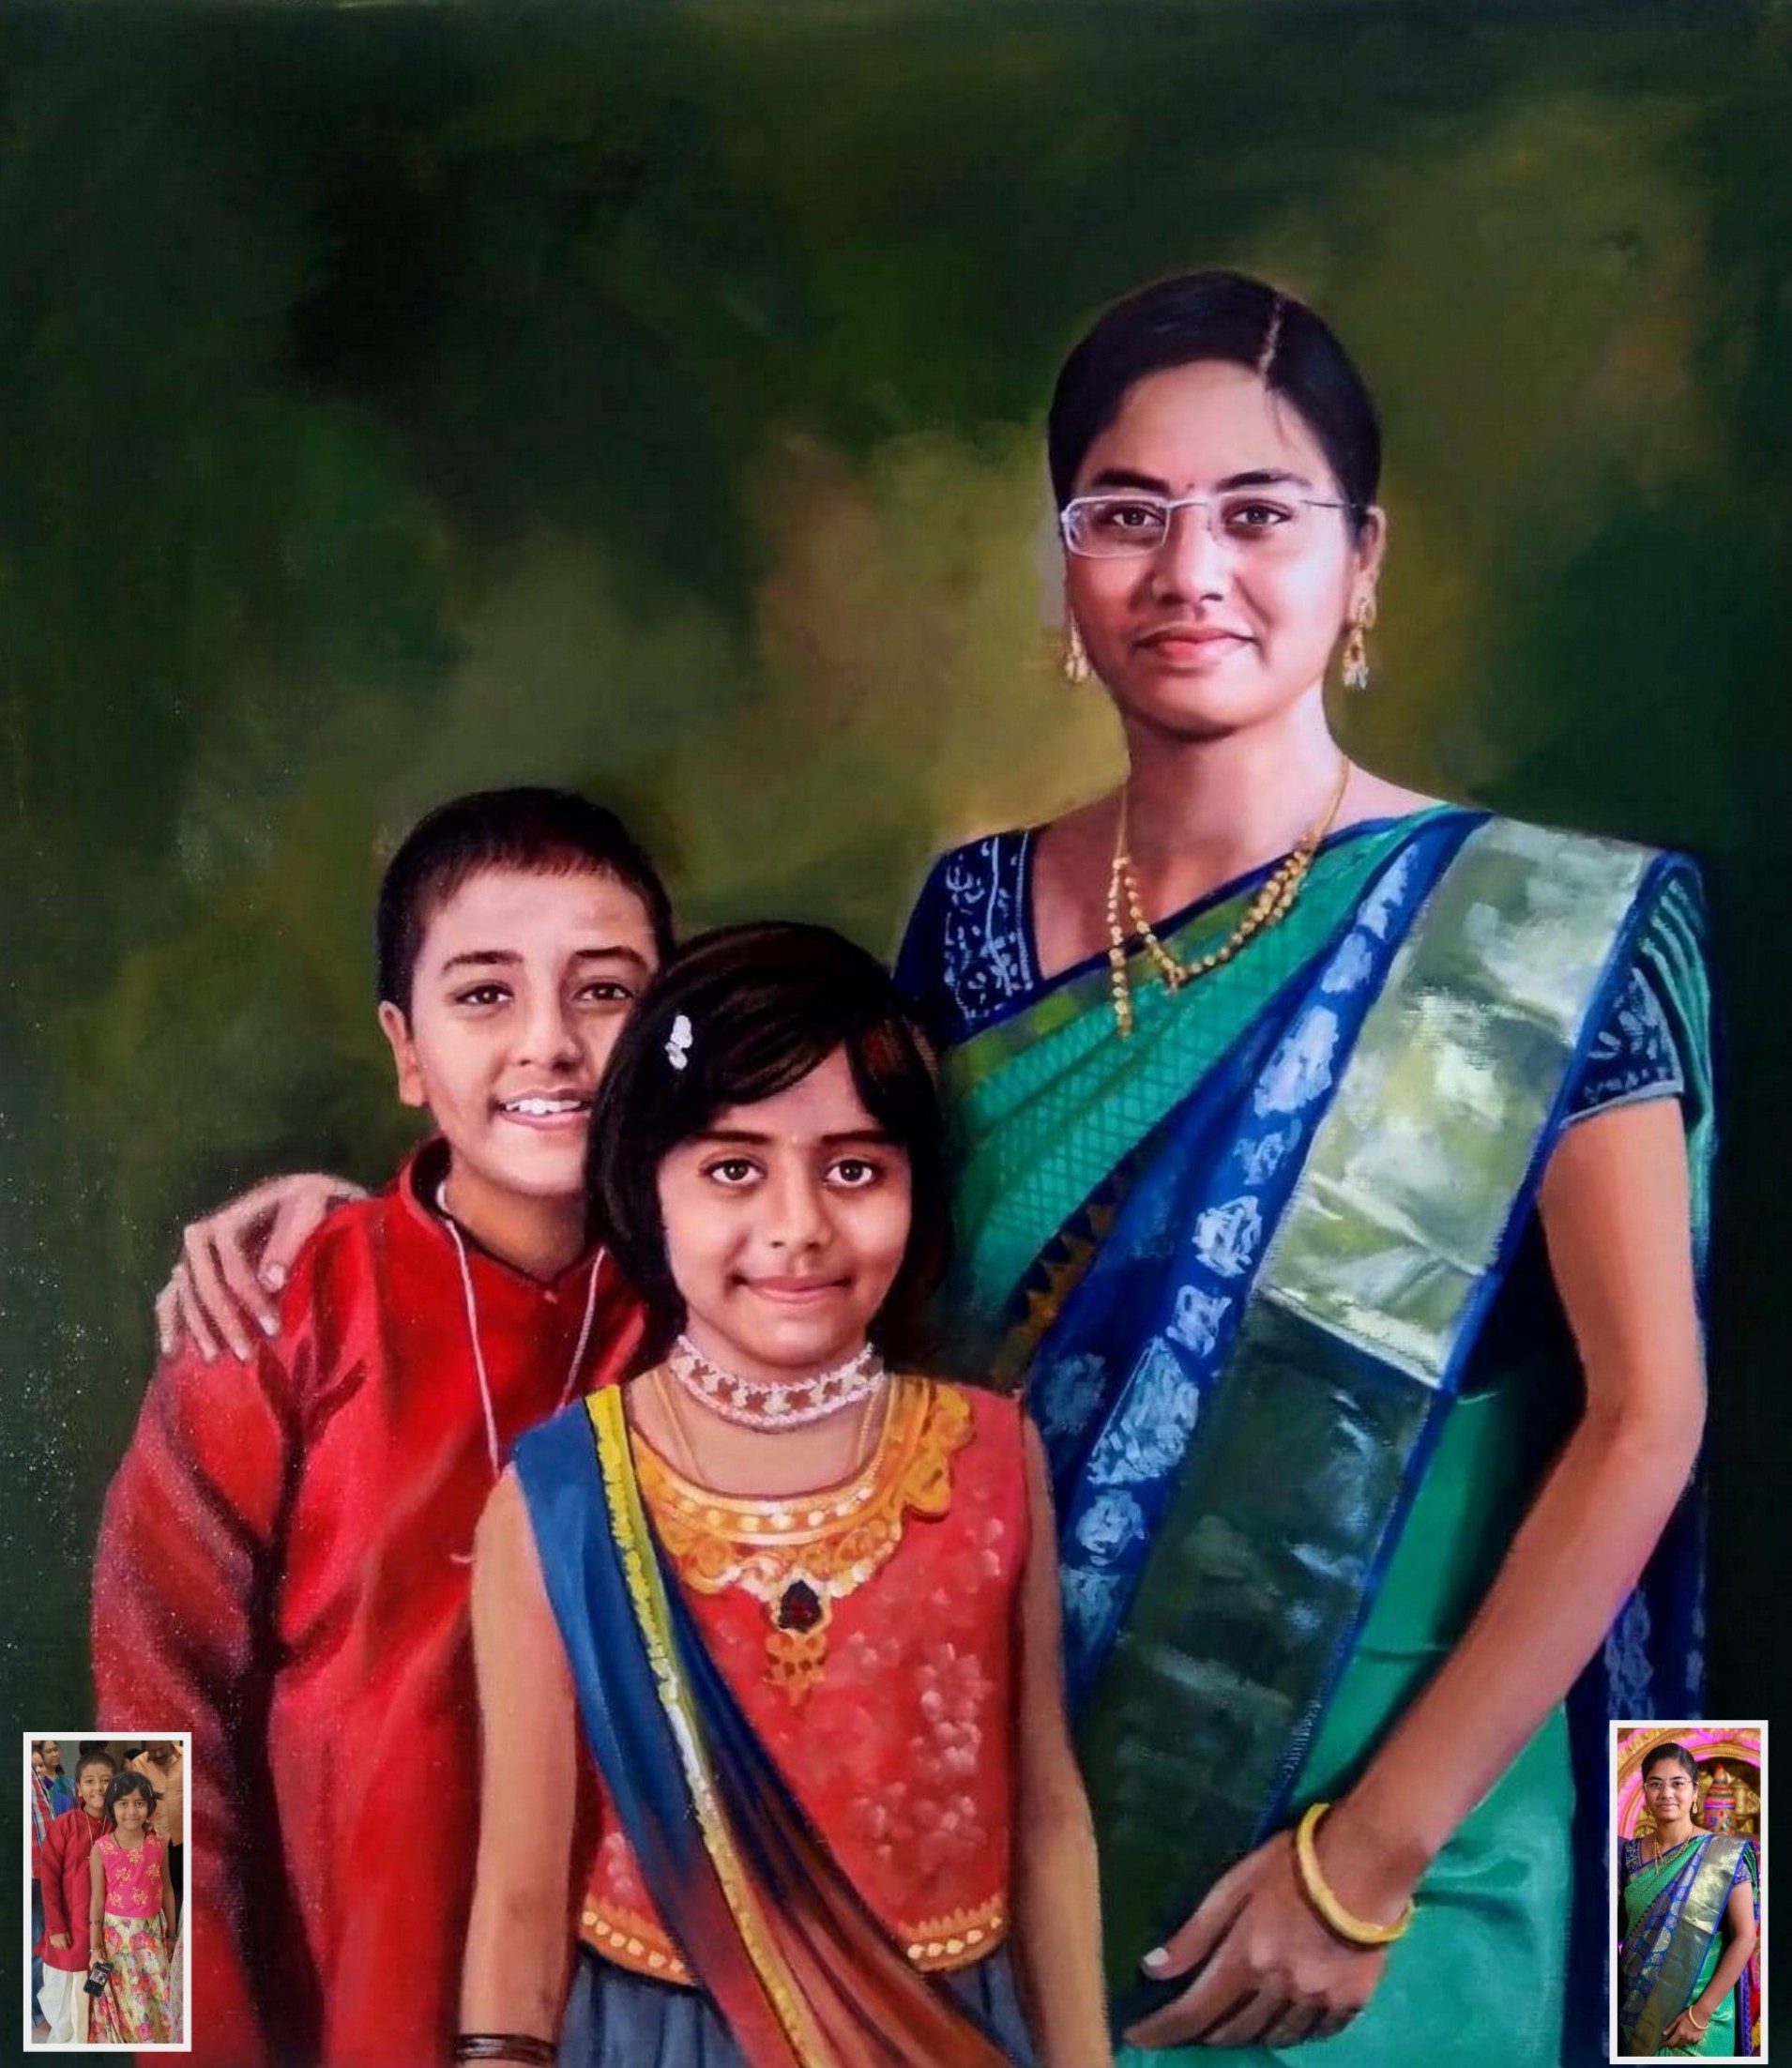 merged photo to oil painting, mom and children merged photo to painting, oil painting from photo, 